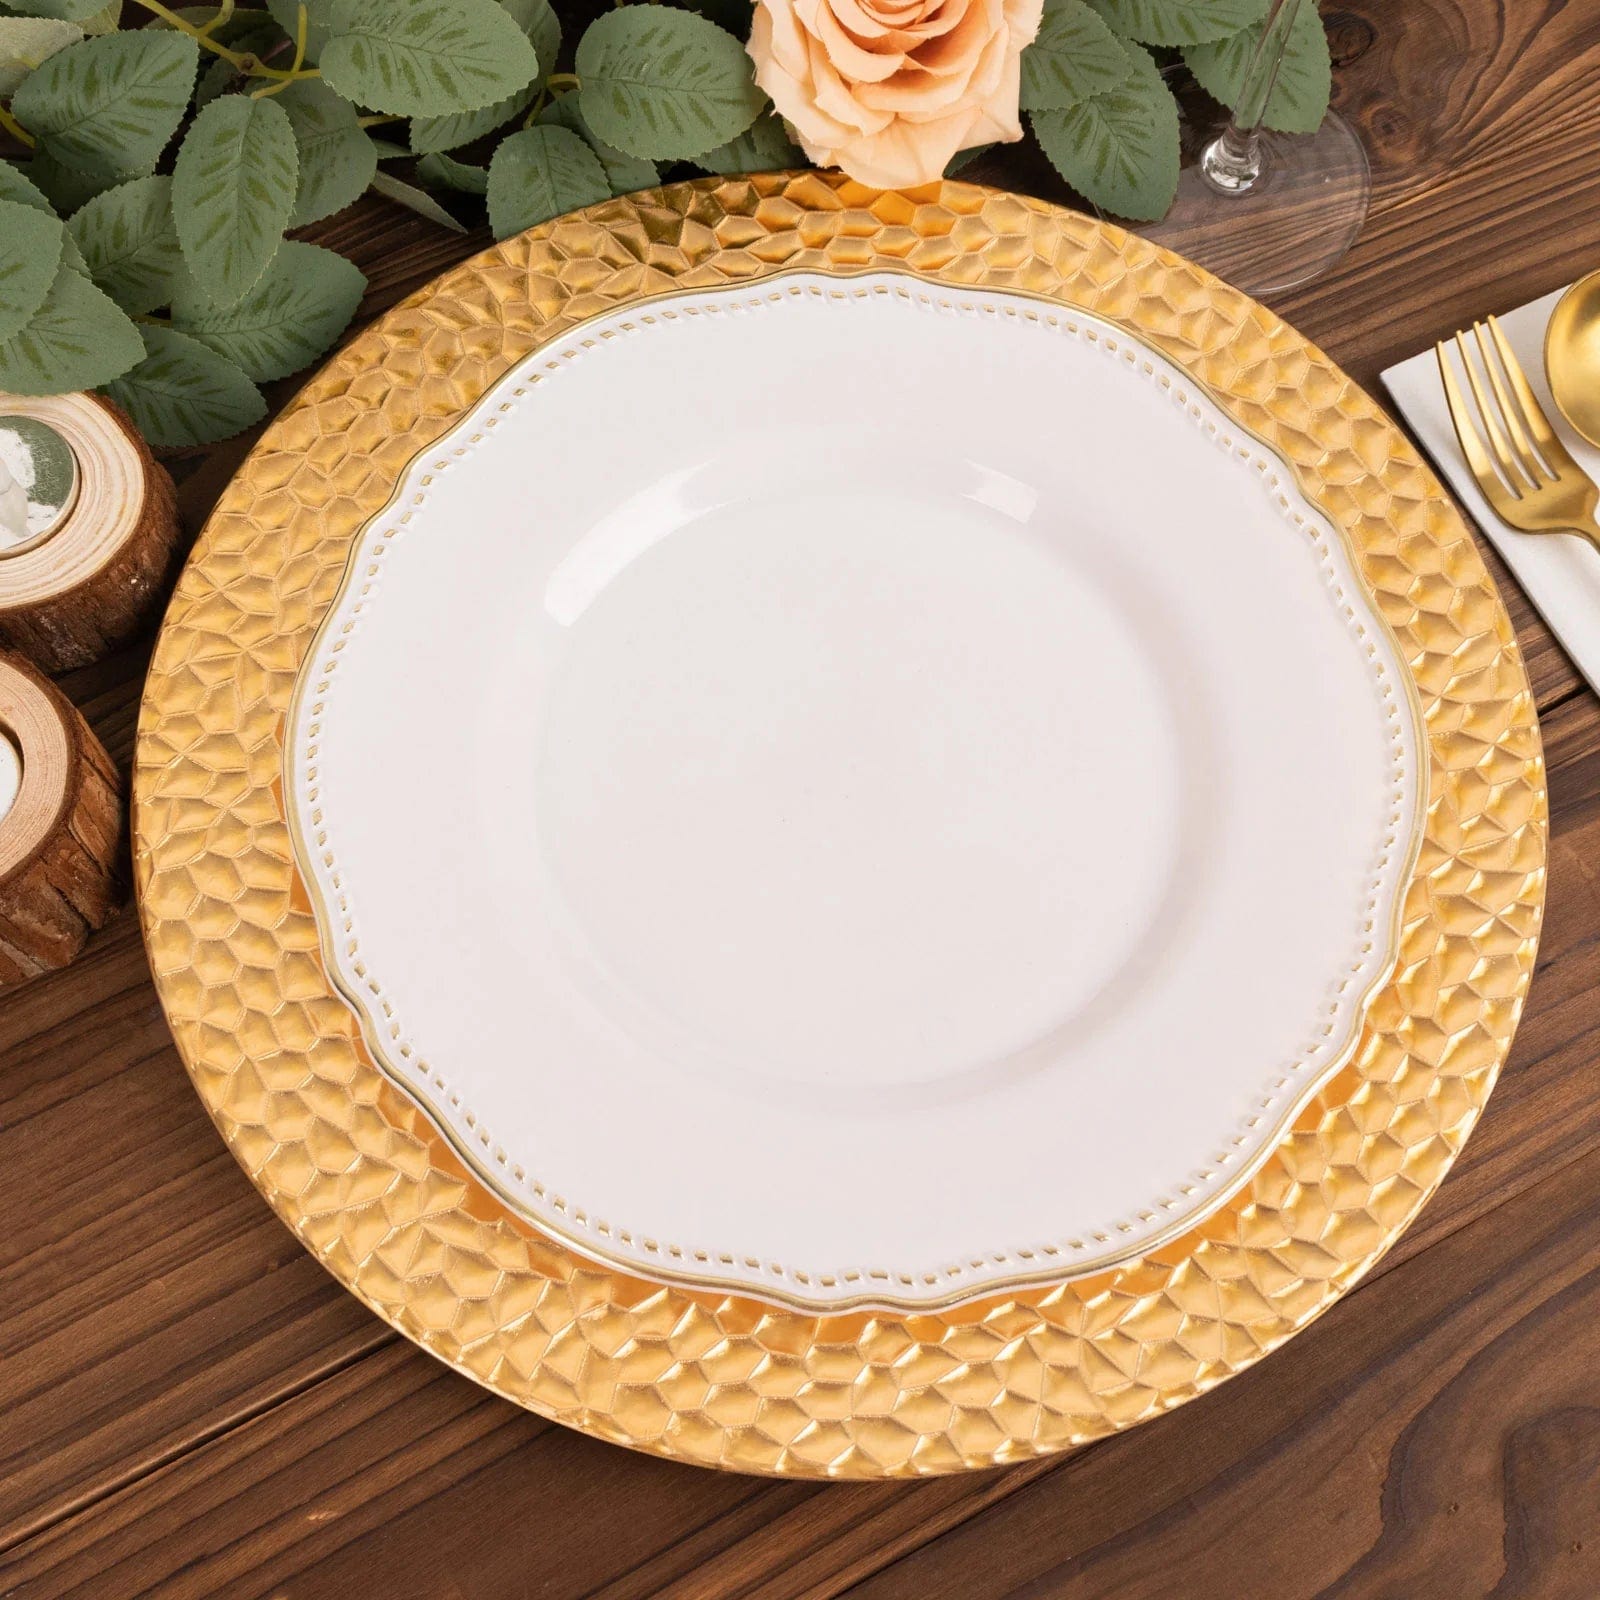 6 Metallic Gold 13 in Round Acrylic Charger Plates with Hammered Rim